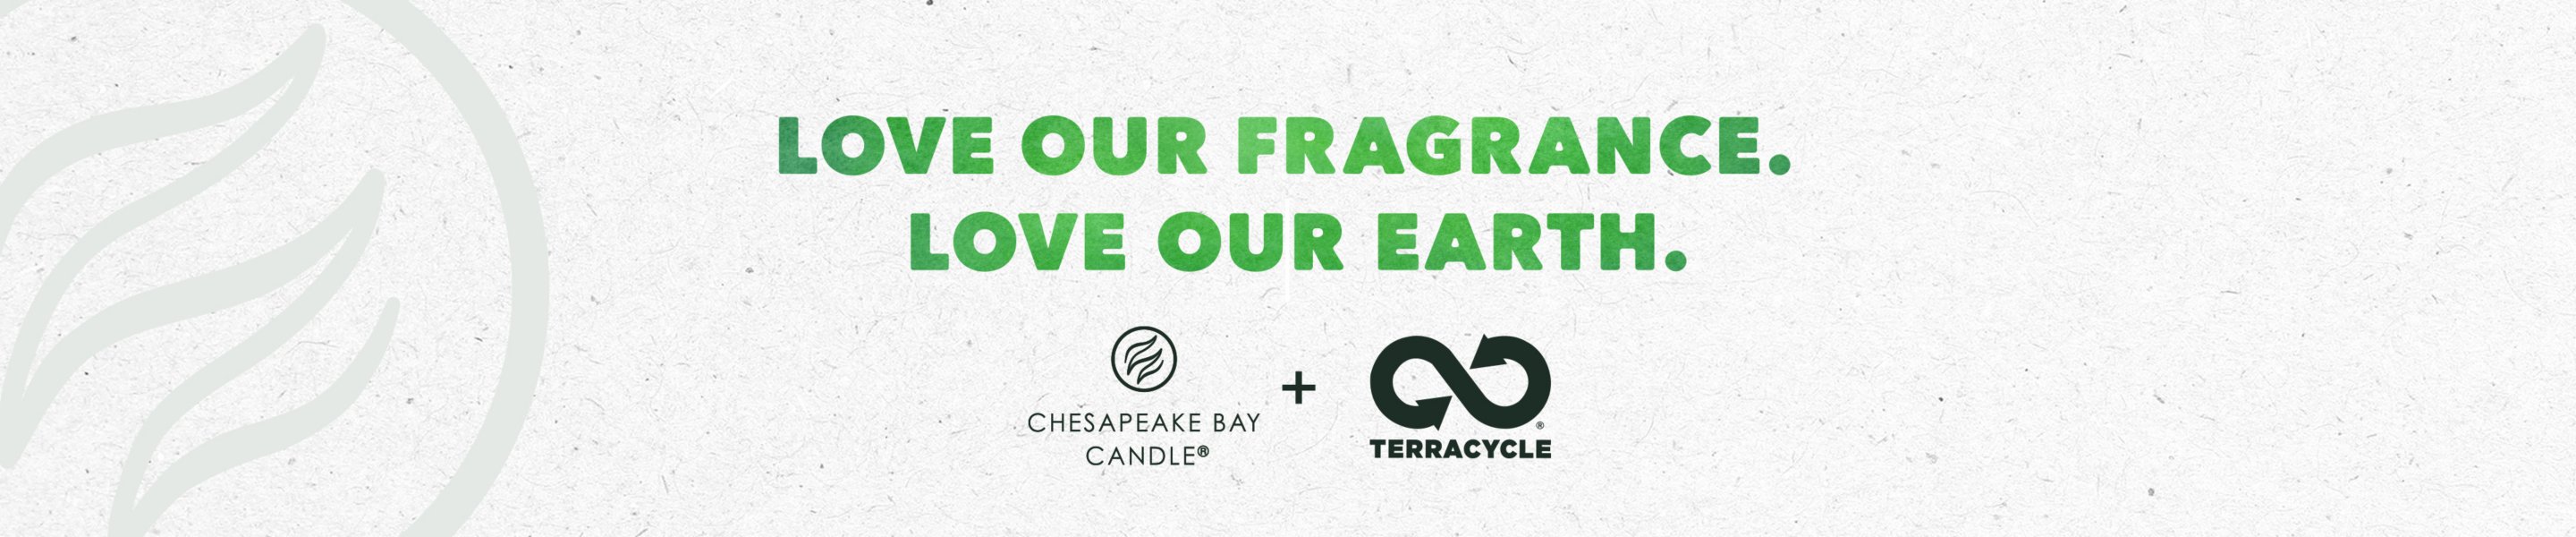 love our fragrance love our earth with chesapeake bay candle and terracycle logos